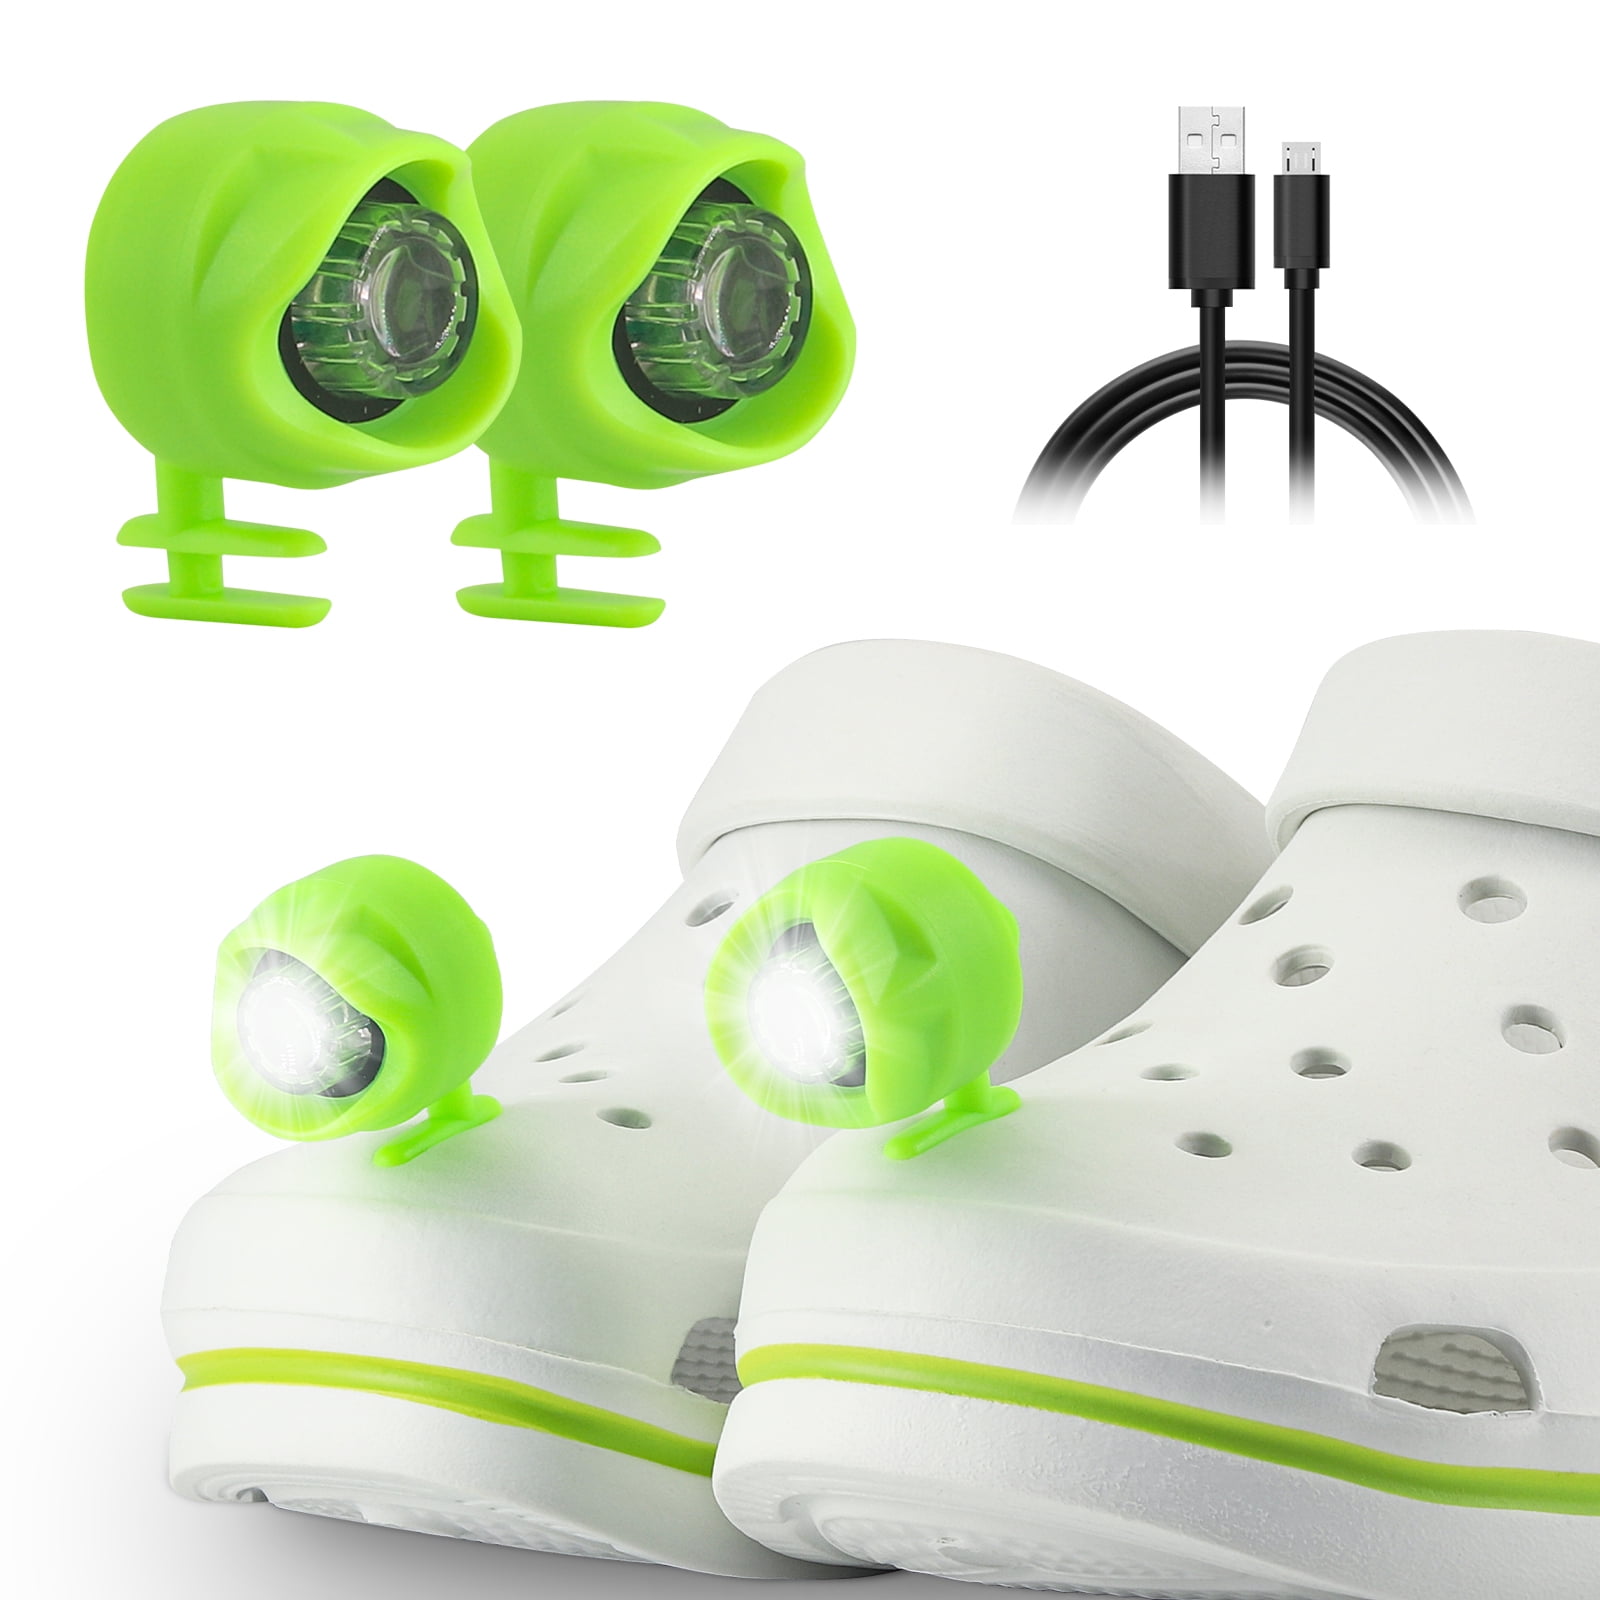 2X LED Croc Shoes Light,Rechargeable Headlights for Crocs ,Funny Light ...